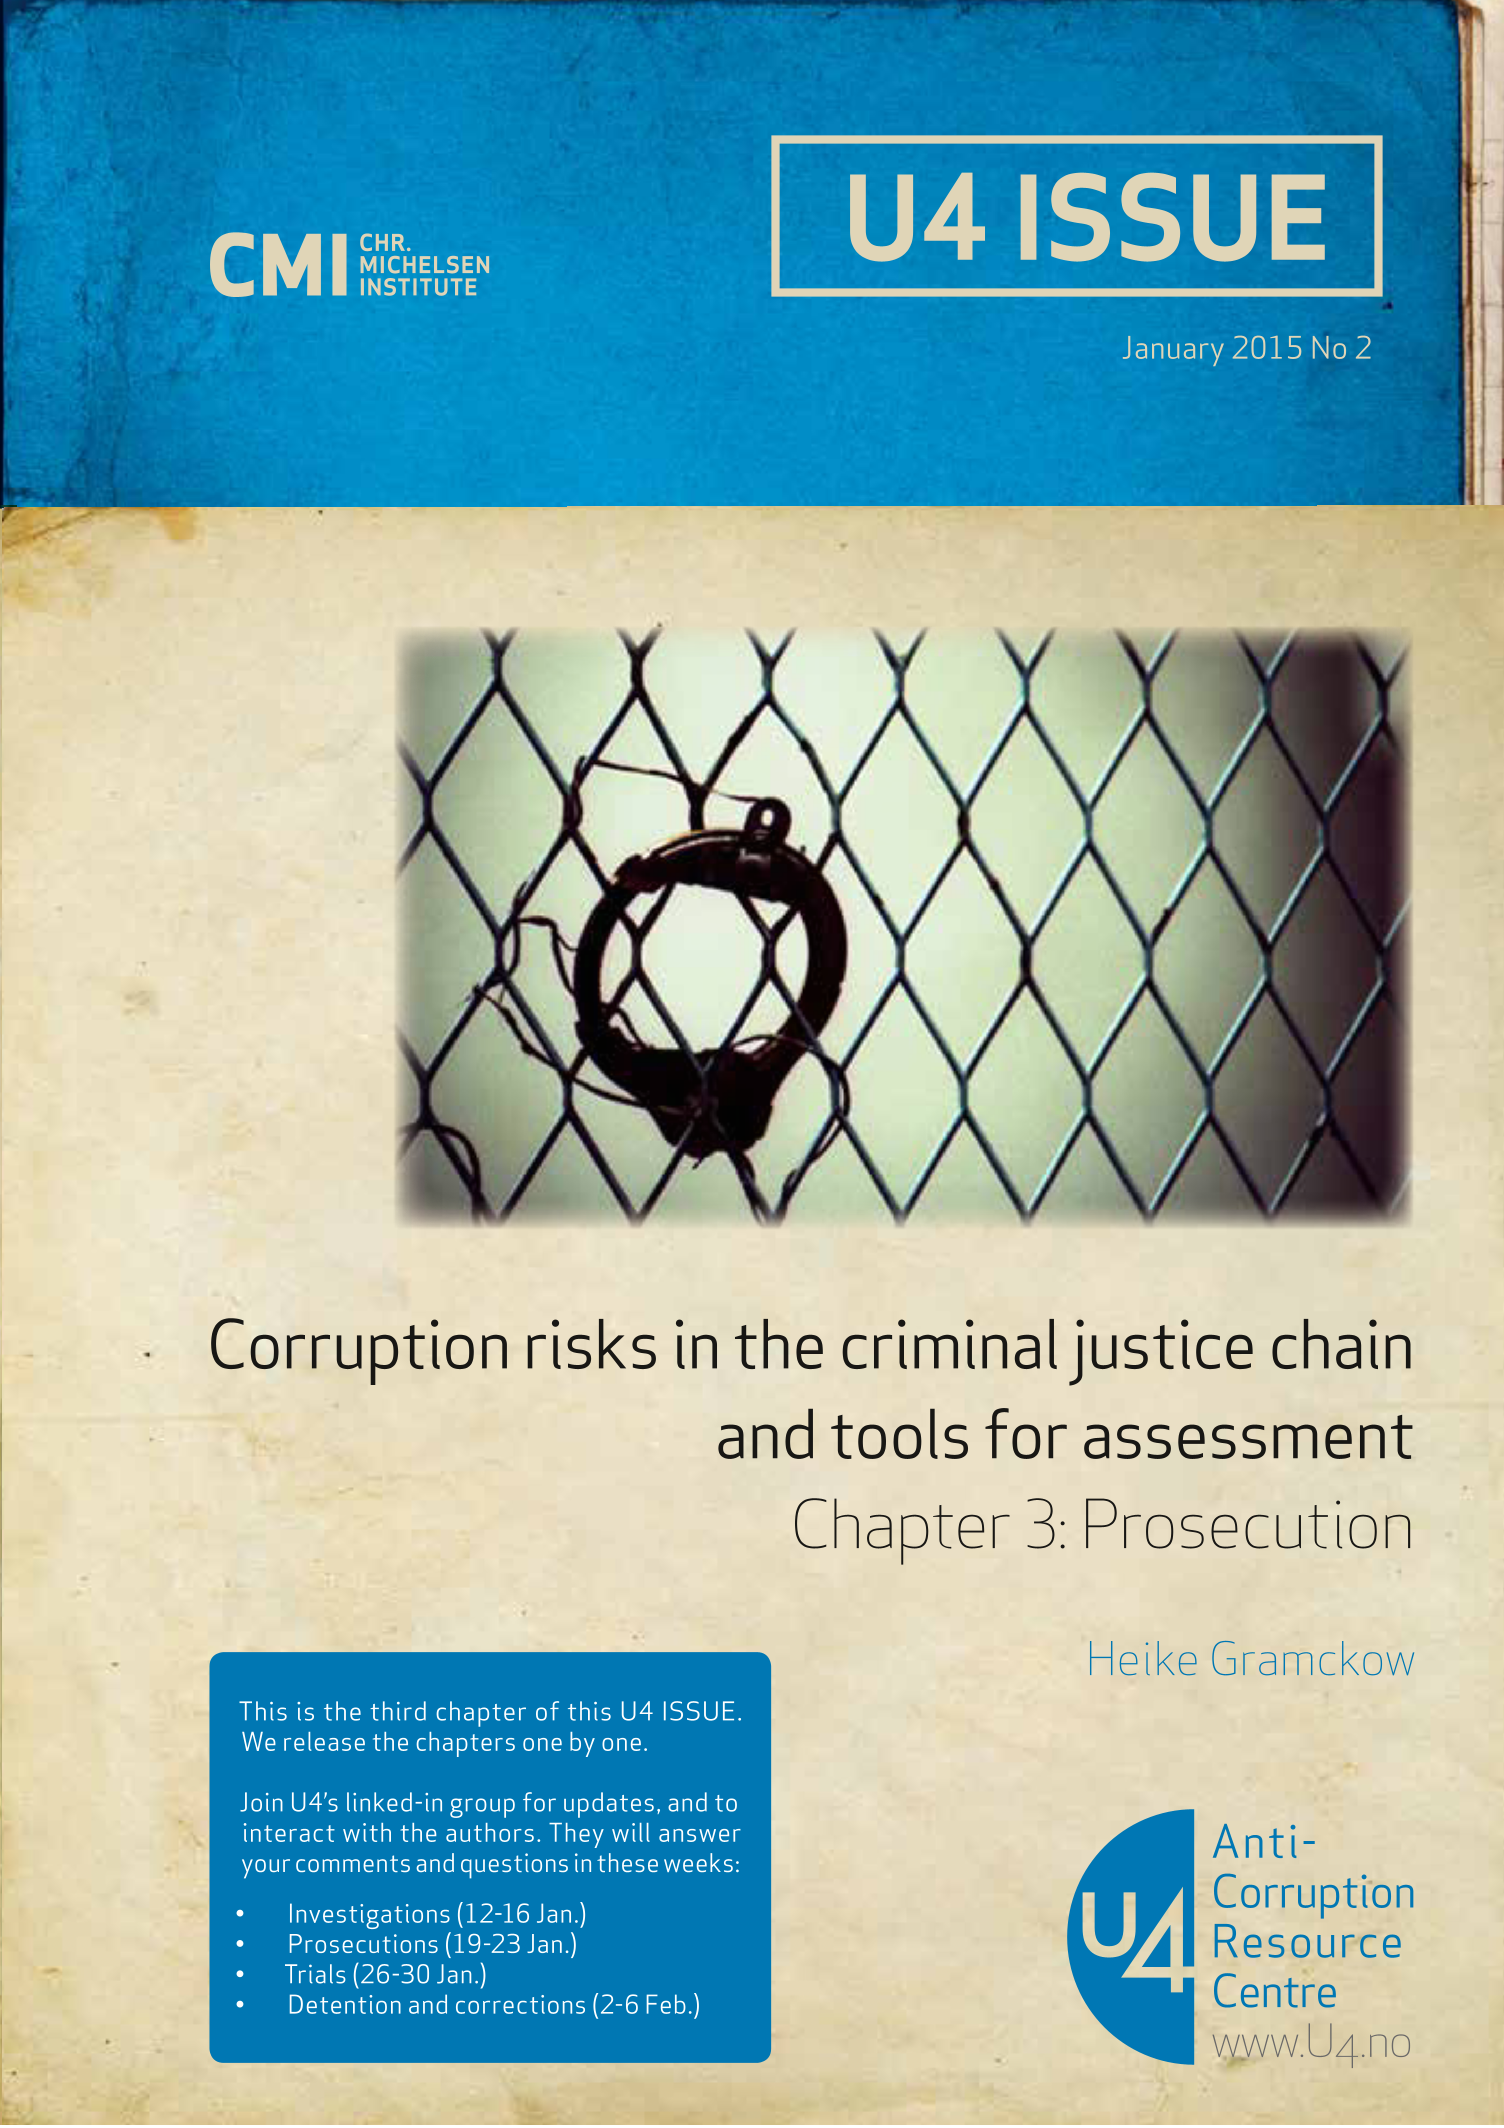 Corruption risks in the criminal justice chain and tools for assessment. Chapter 3: Prosecution